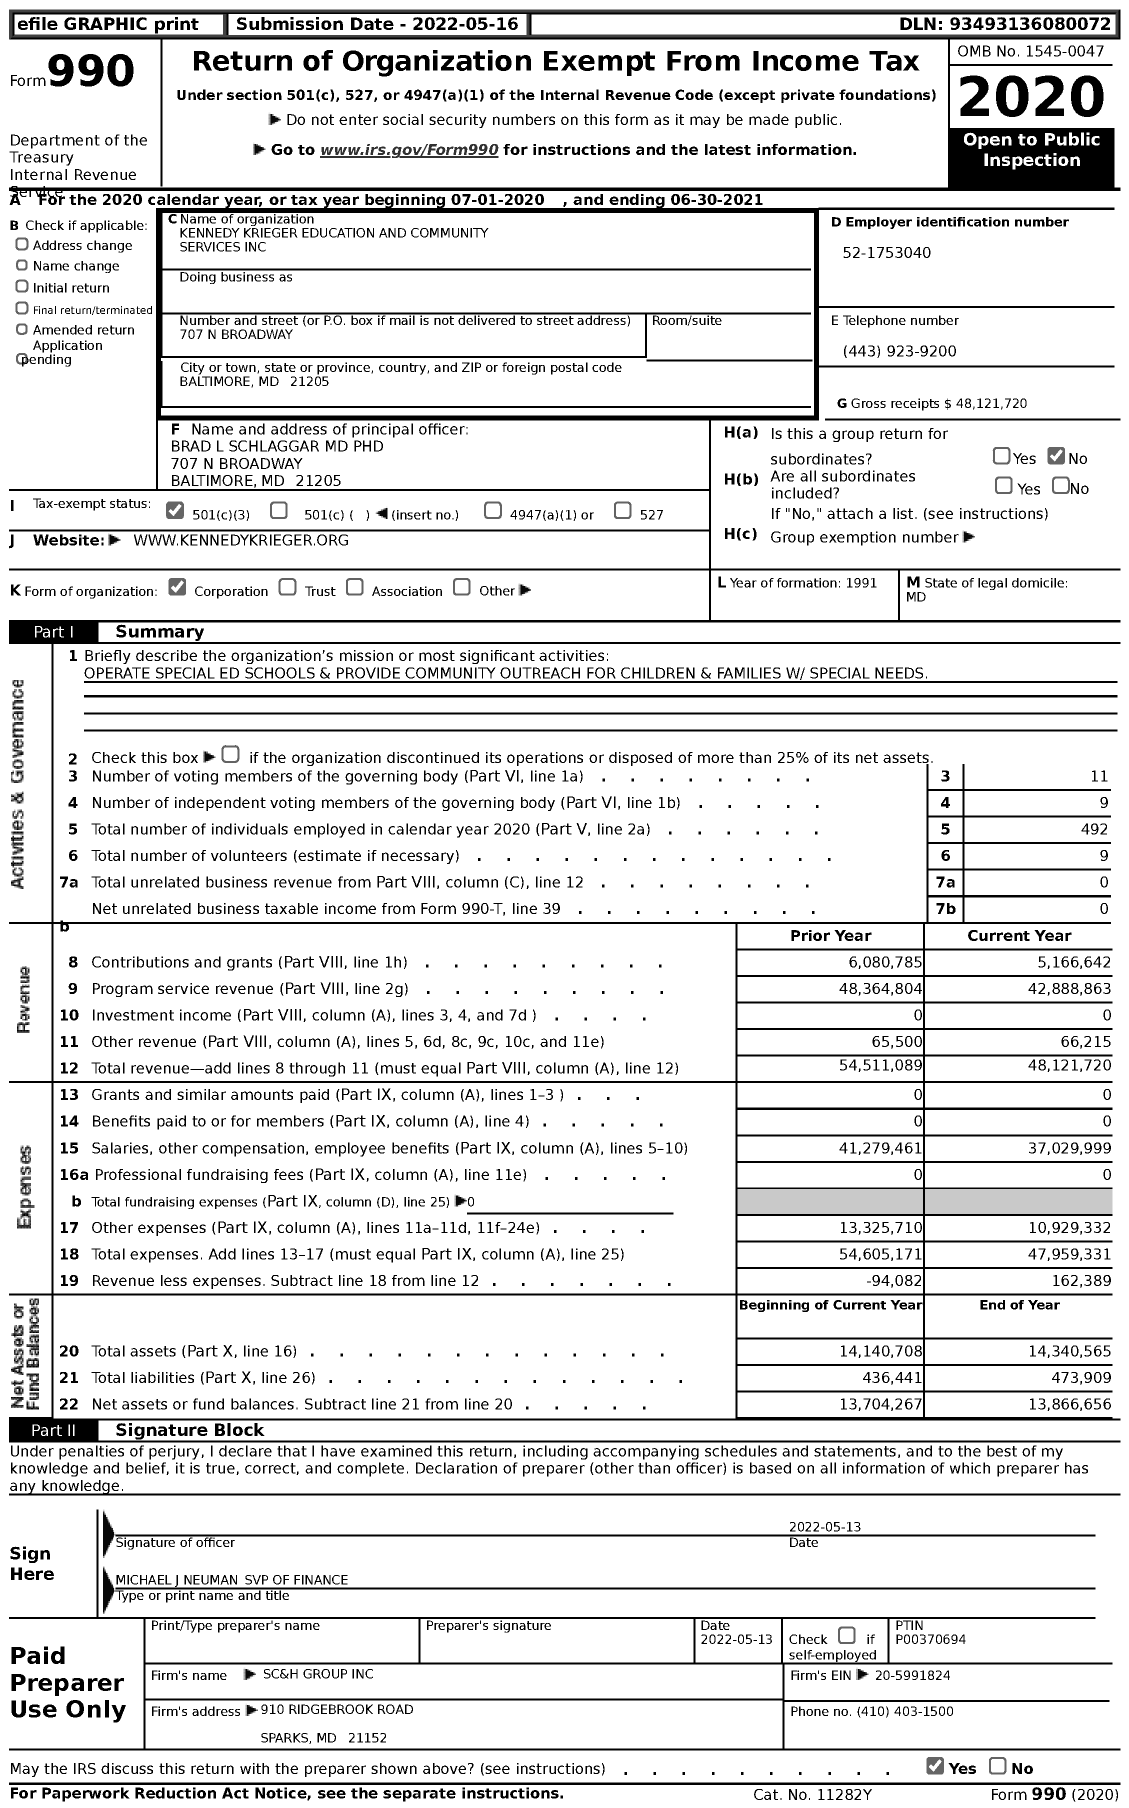 Image of first page of 2020 Form 990 for Kennedy Krieger Education and Community Services